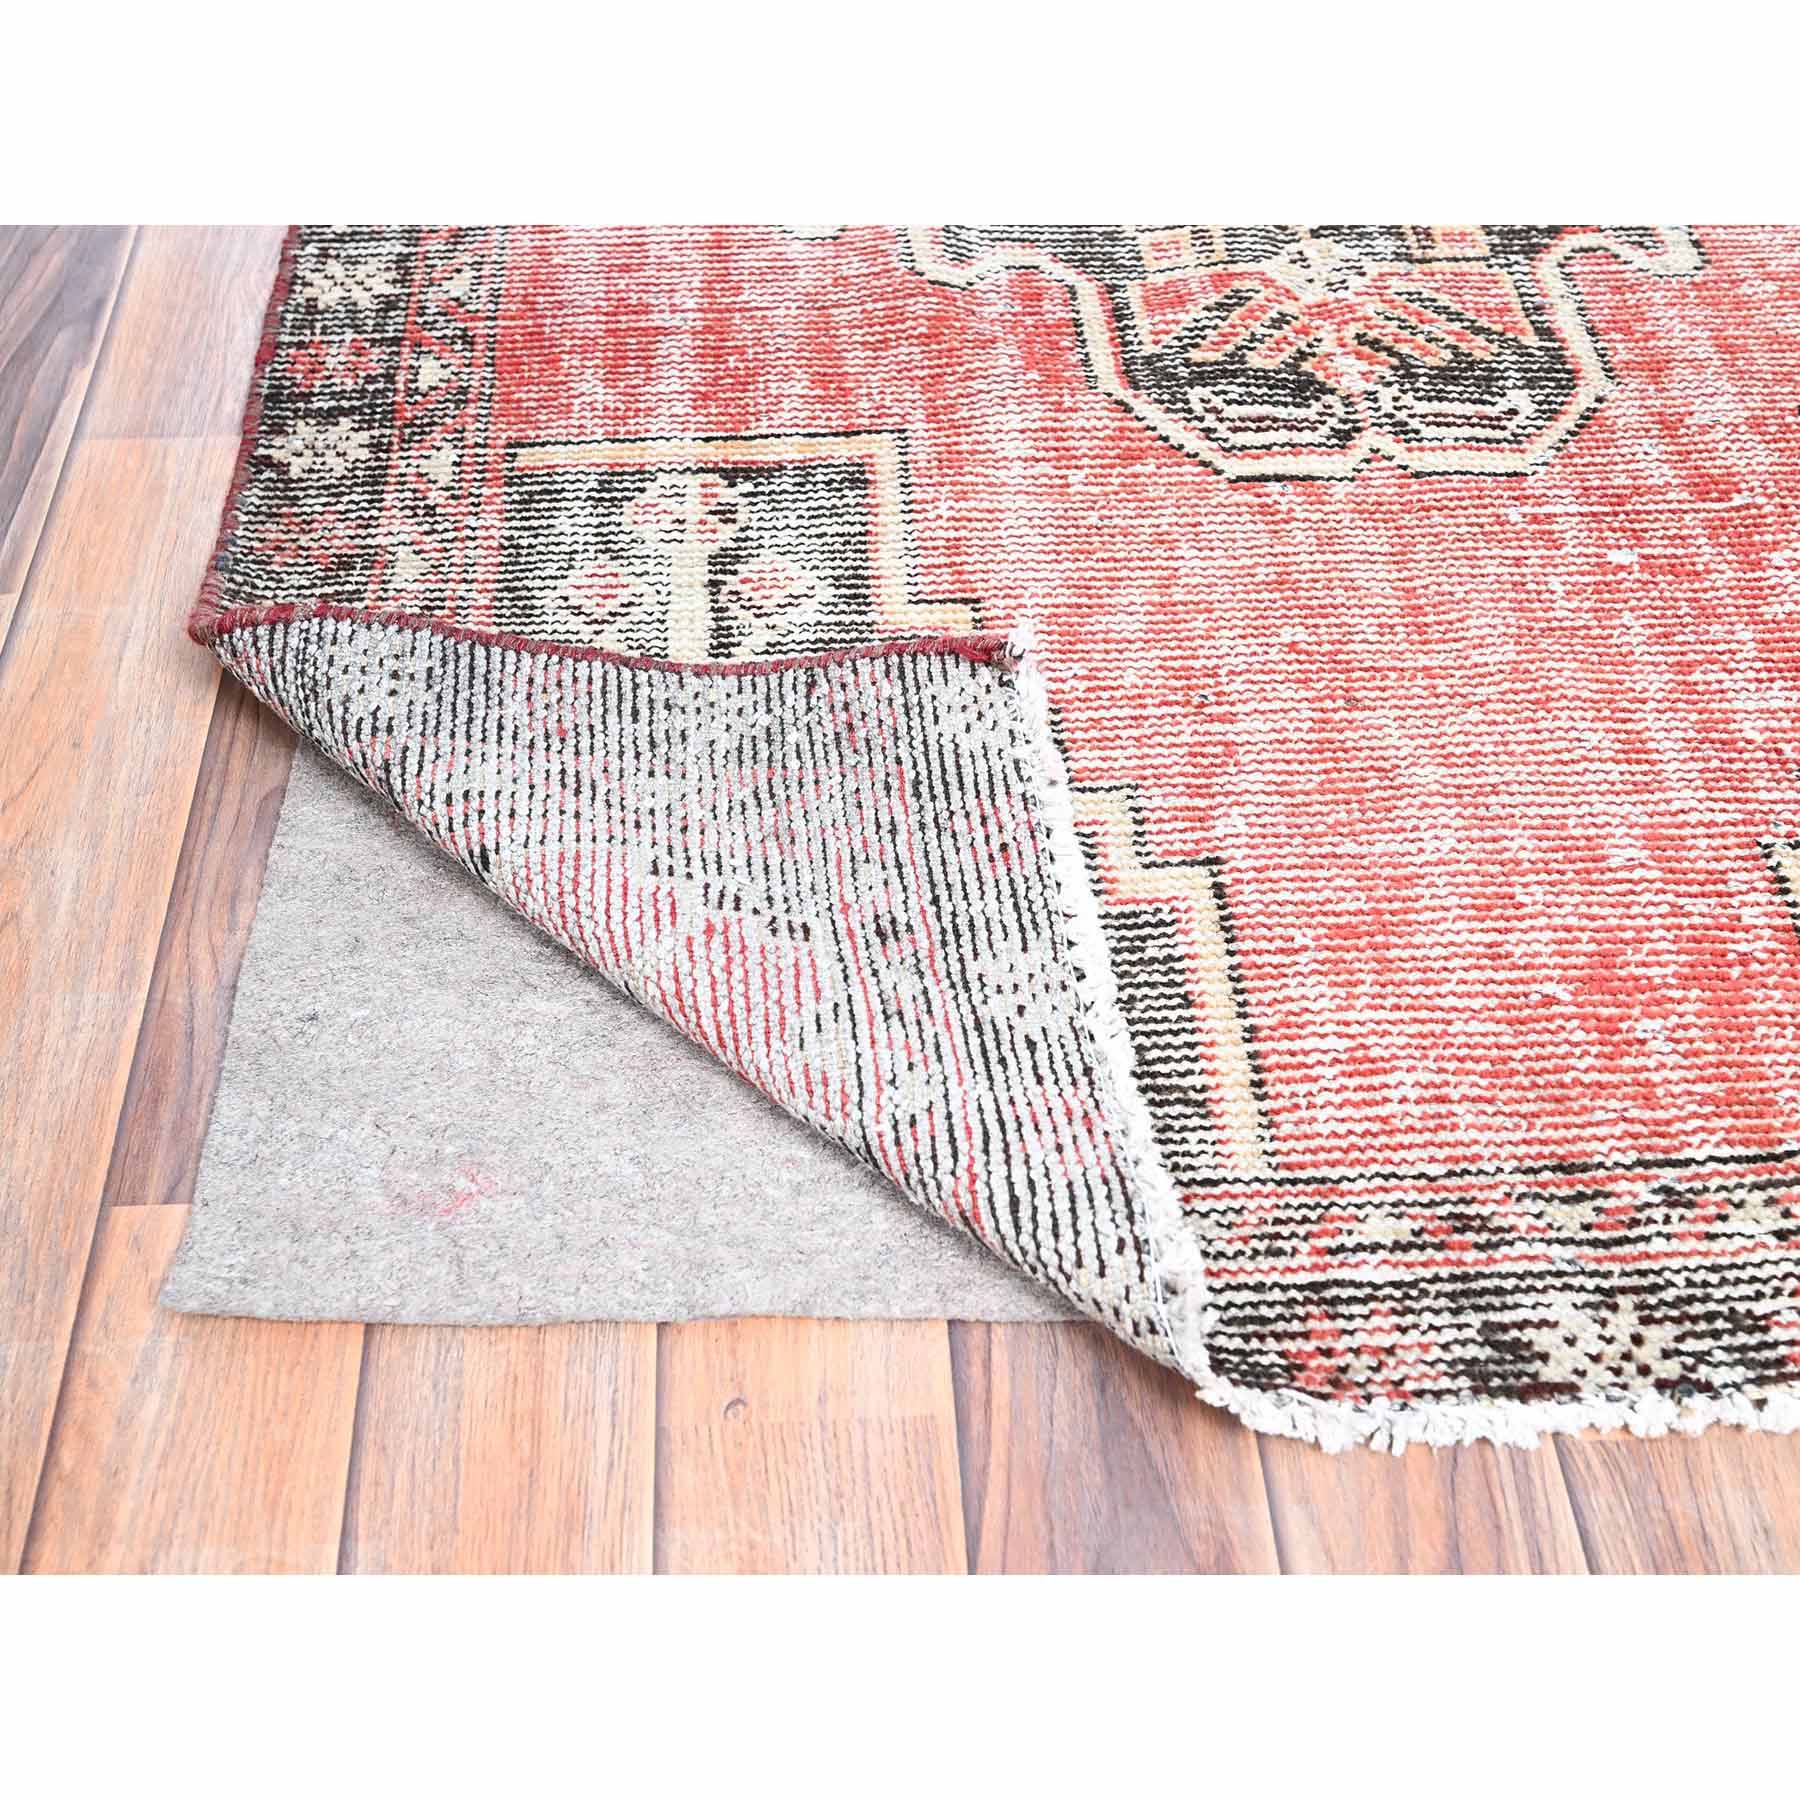 Overdyed-Vintage-Hand-Knotted-Rug-430350